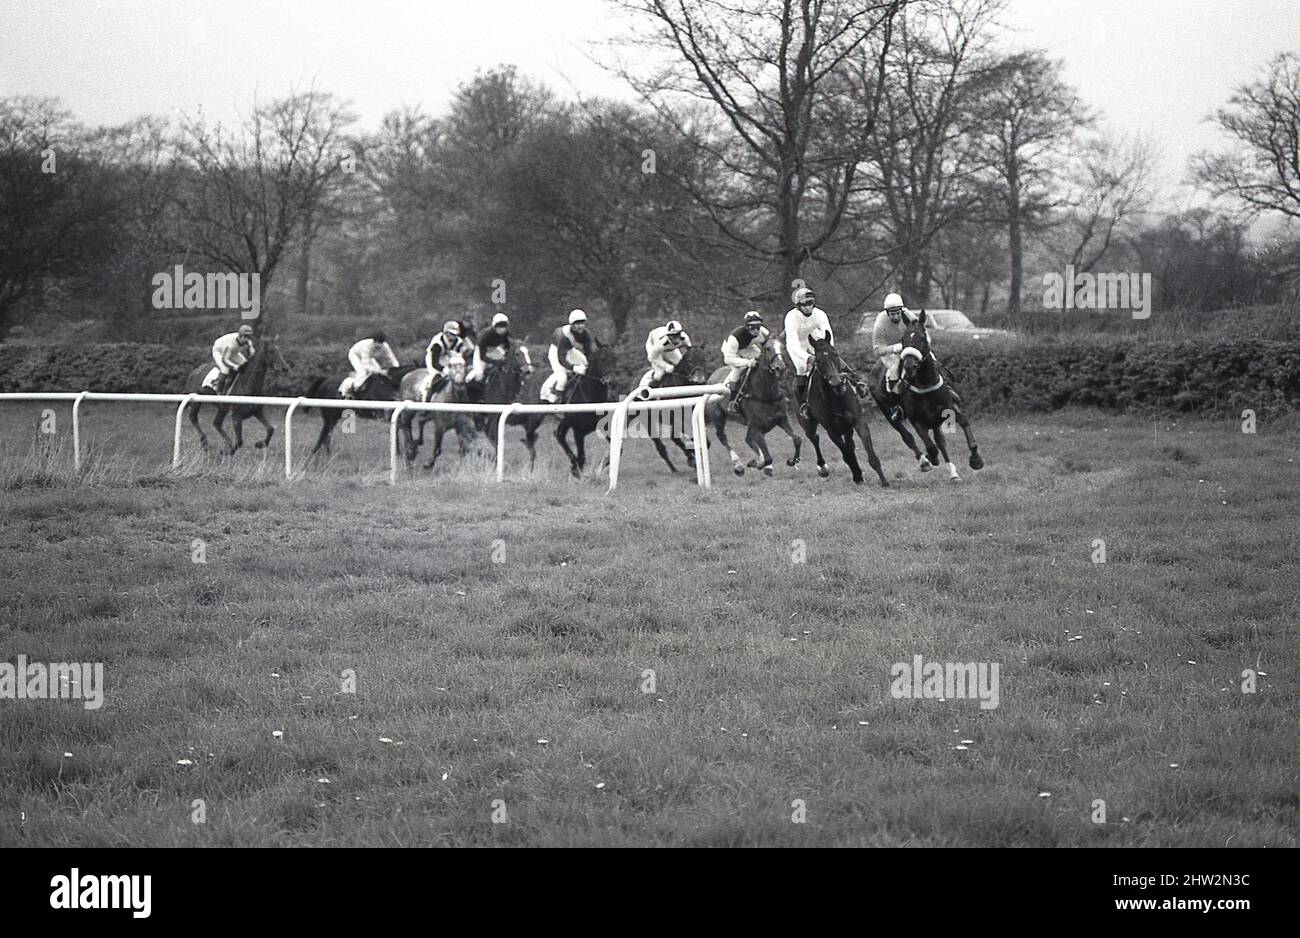 1987, historical, Middleton Point-to-Point, jockeys on horses coming around a turn at the course at Whitwell-on-the-Hill, York, England, UK. A Point-to-Point is a form of amateur horse racing over fences, which orginated in England in the 19th century as a way of keeping horses ridden at fox hunts fit. They were first called hunt races. Stock Photo